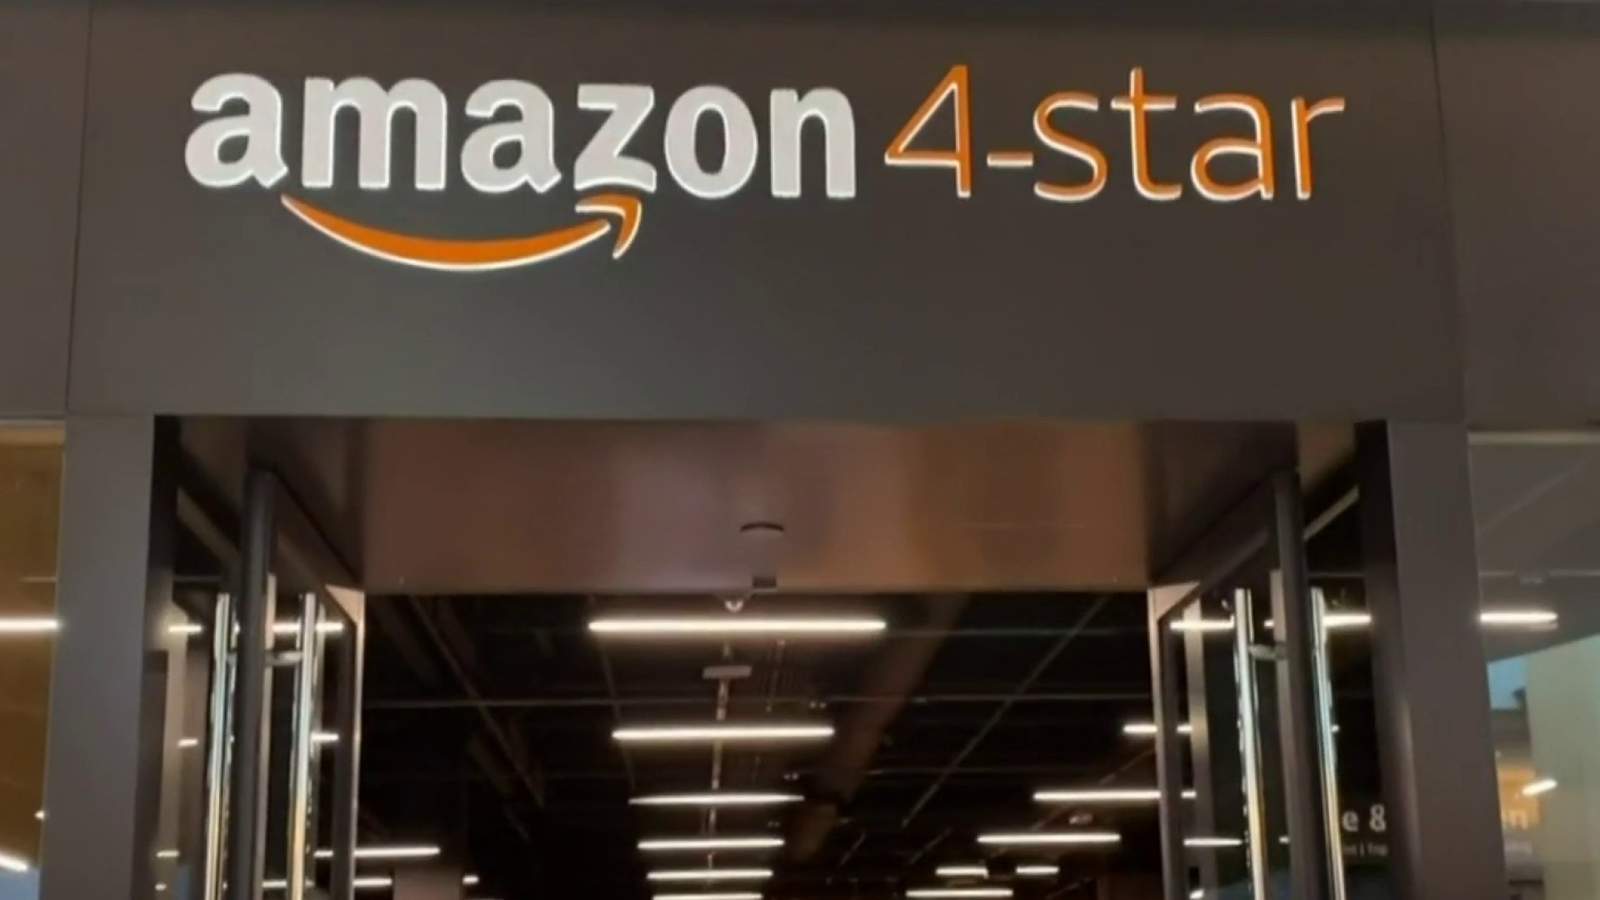 Have you seen what Amazon has in Troy?